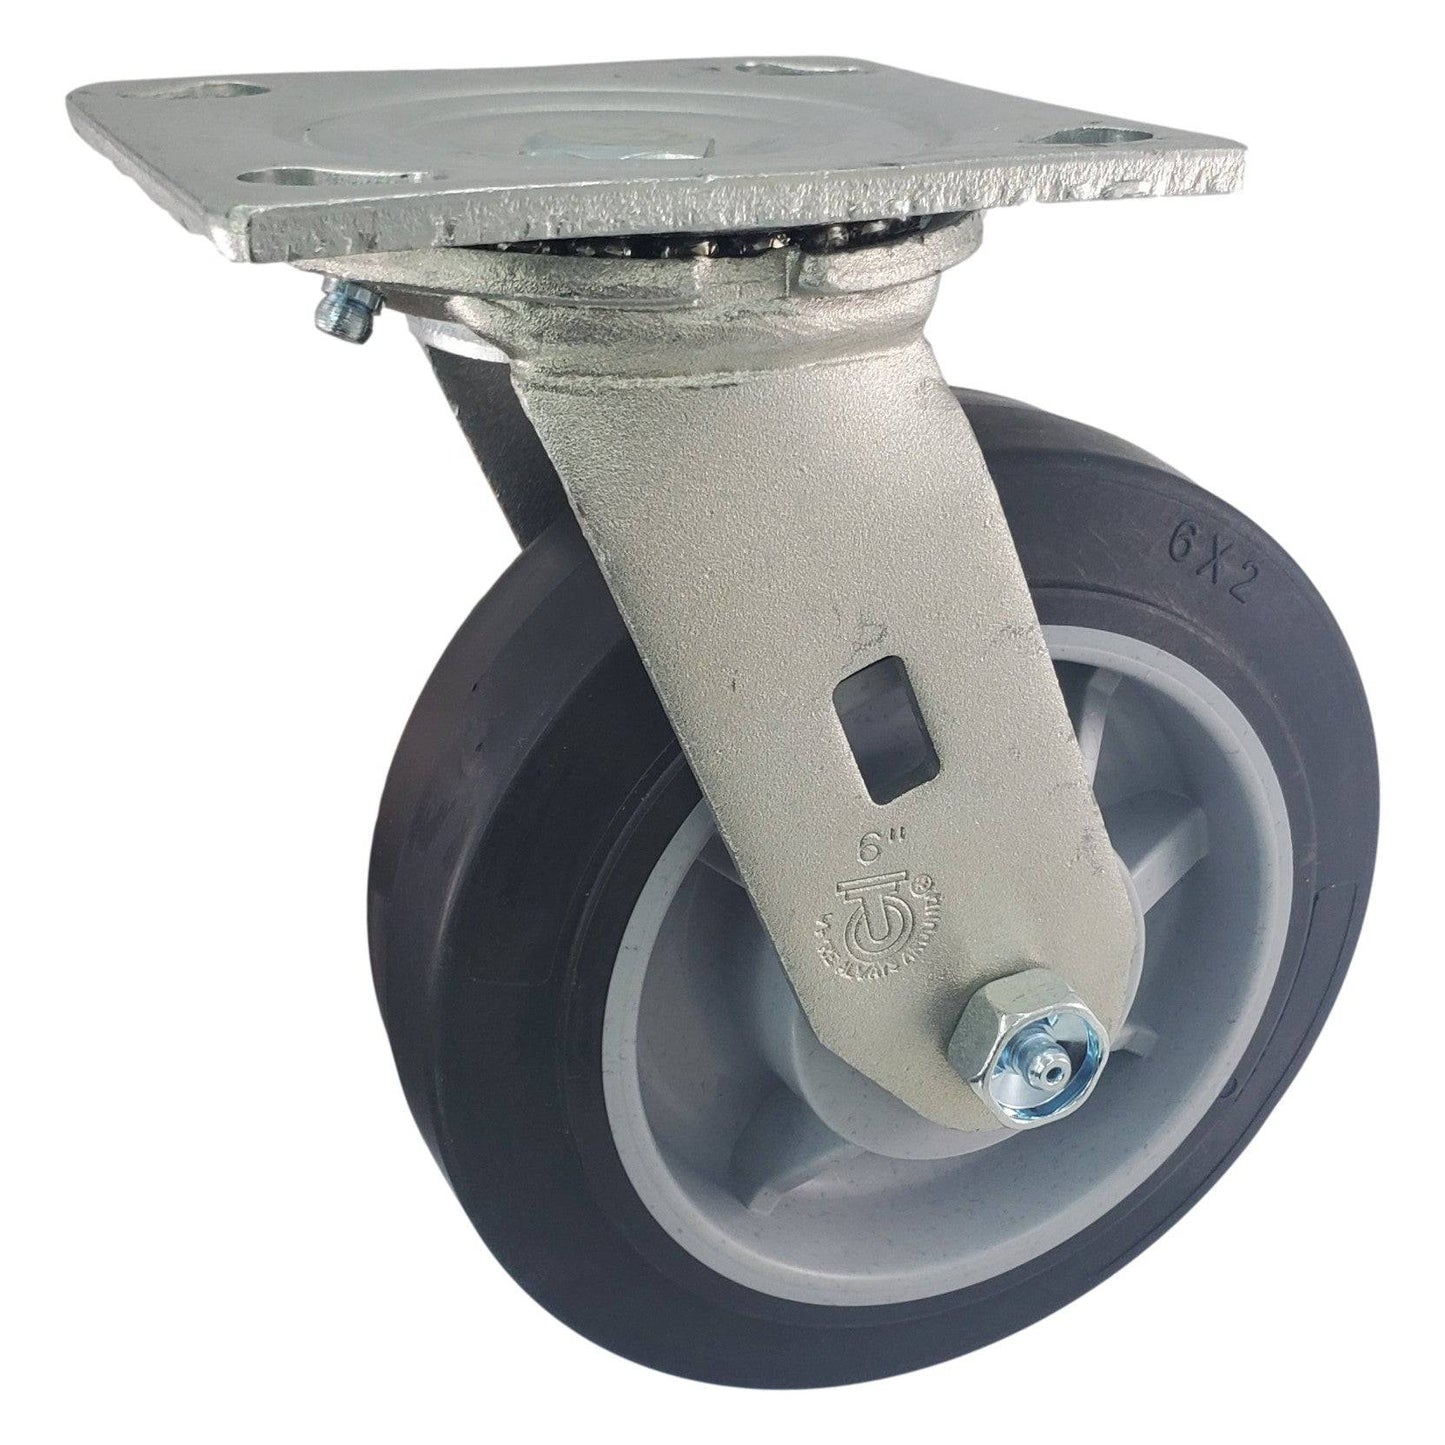 6" x 2" Nomadic Wheel Swivel Caster - 600 lbs. capacity - Durable Superior Casters